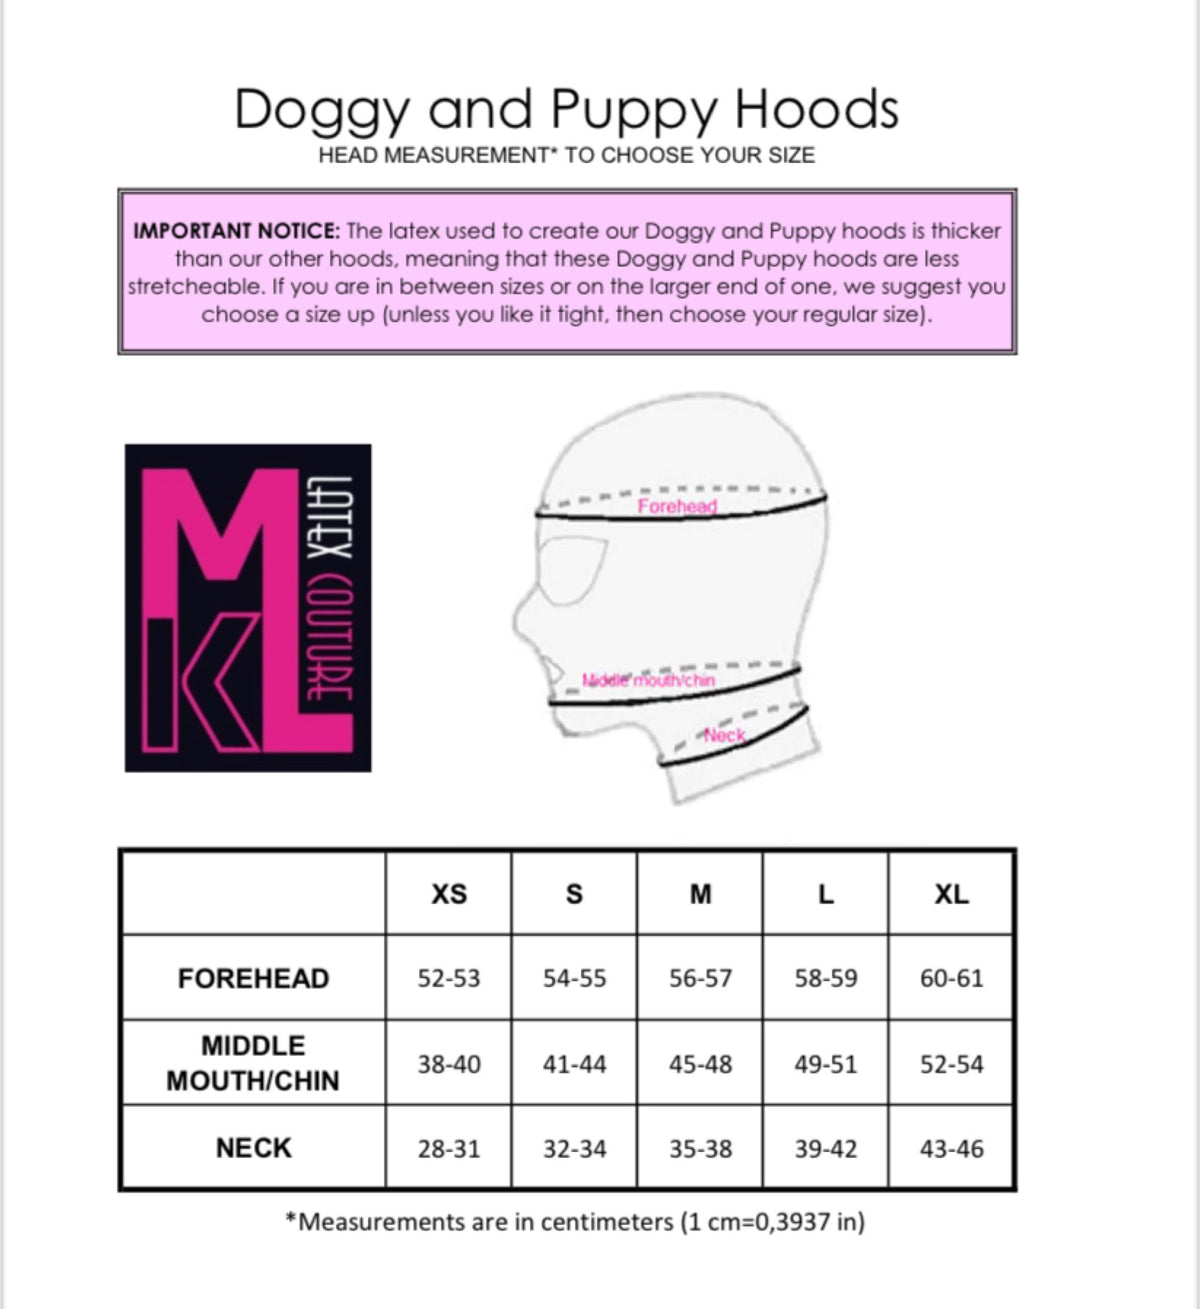 Doggy and Puppy Latex Hood Head measurements